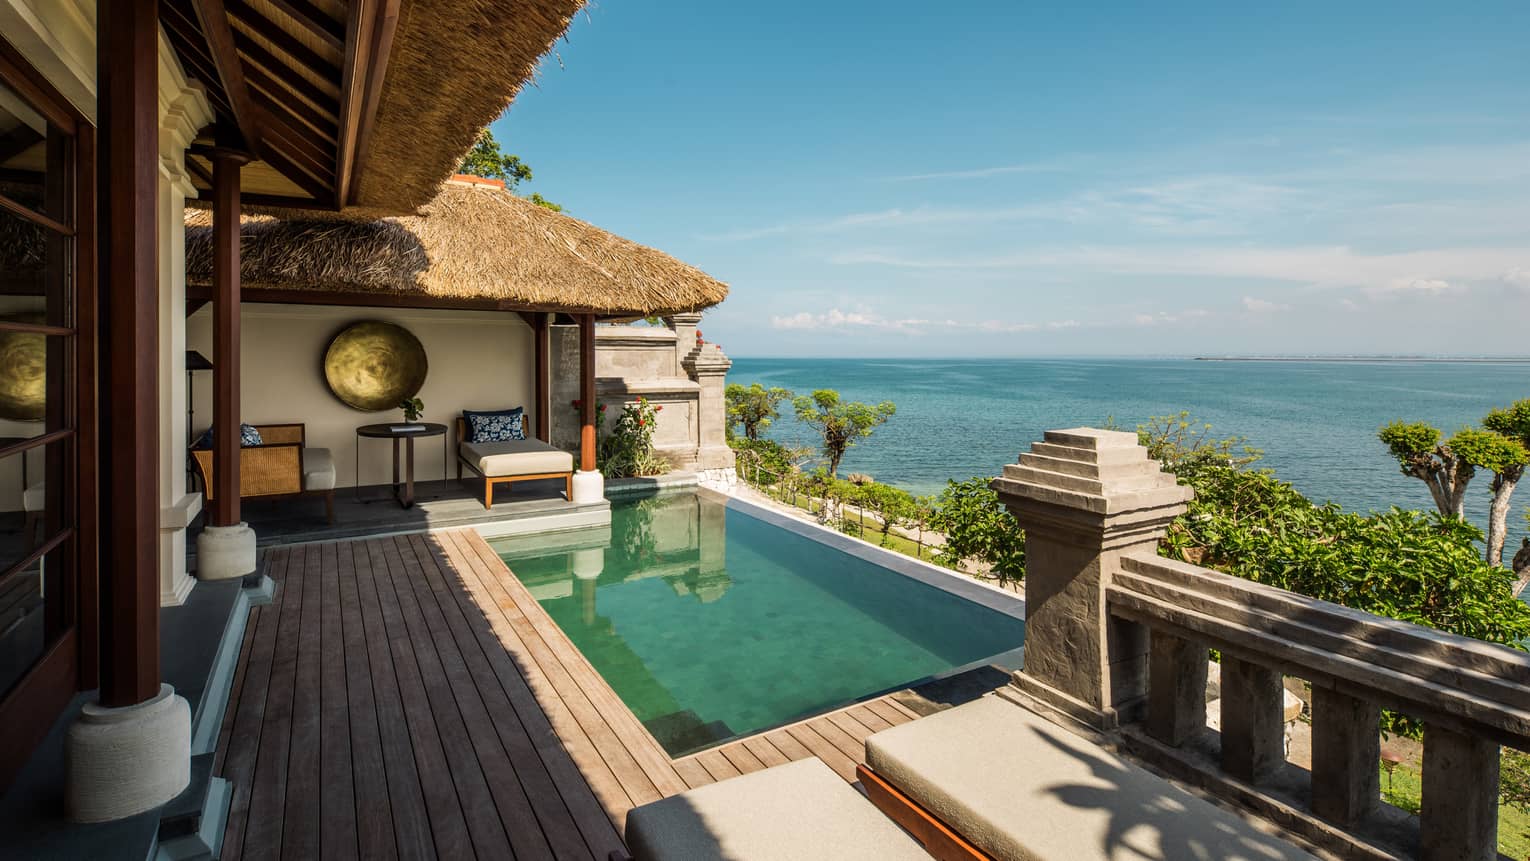 Premier Ocean Villa sunny patio with private swimming pool, large deck, brass art, ocean views